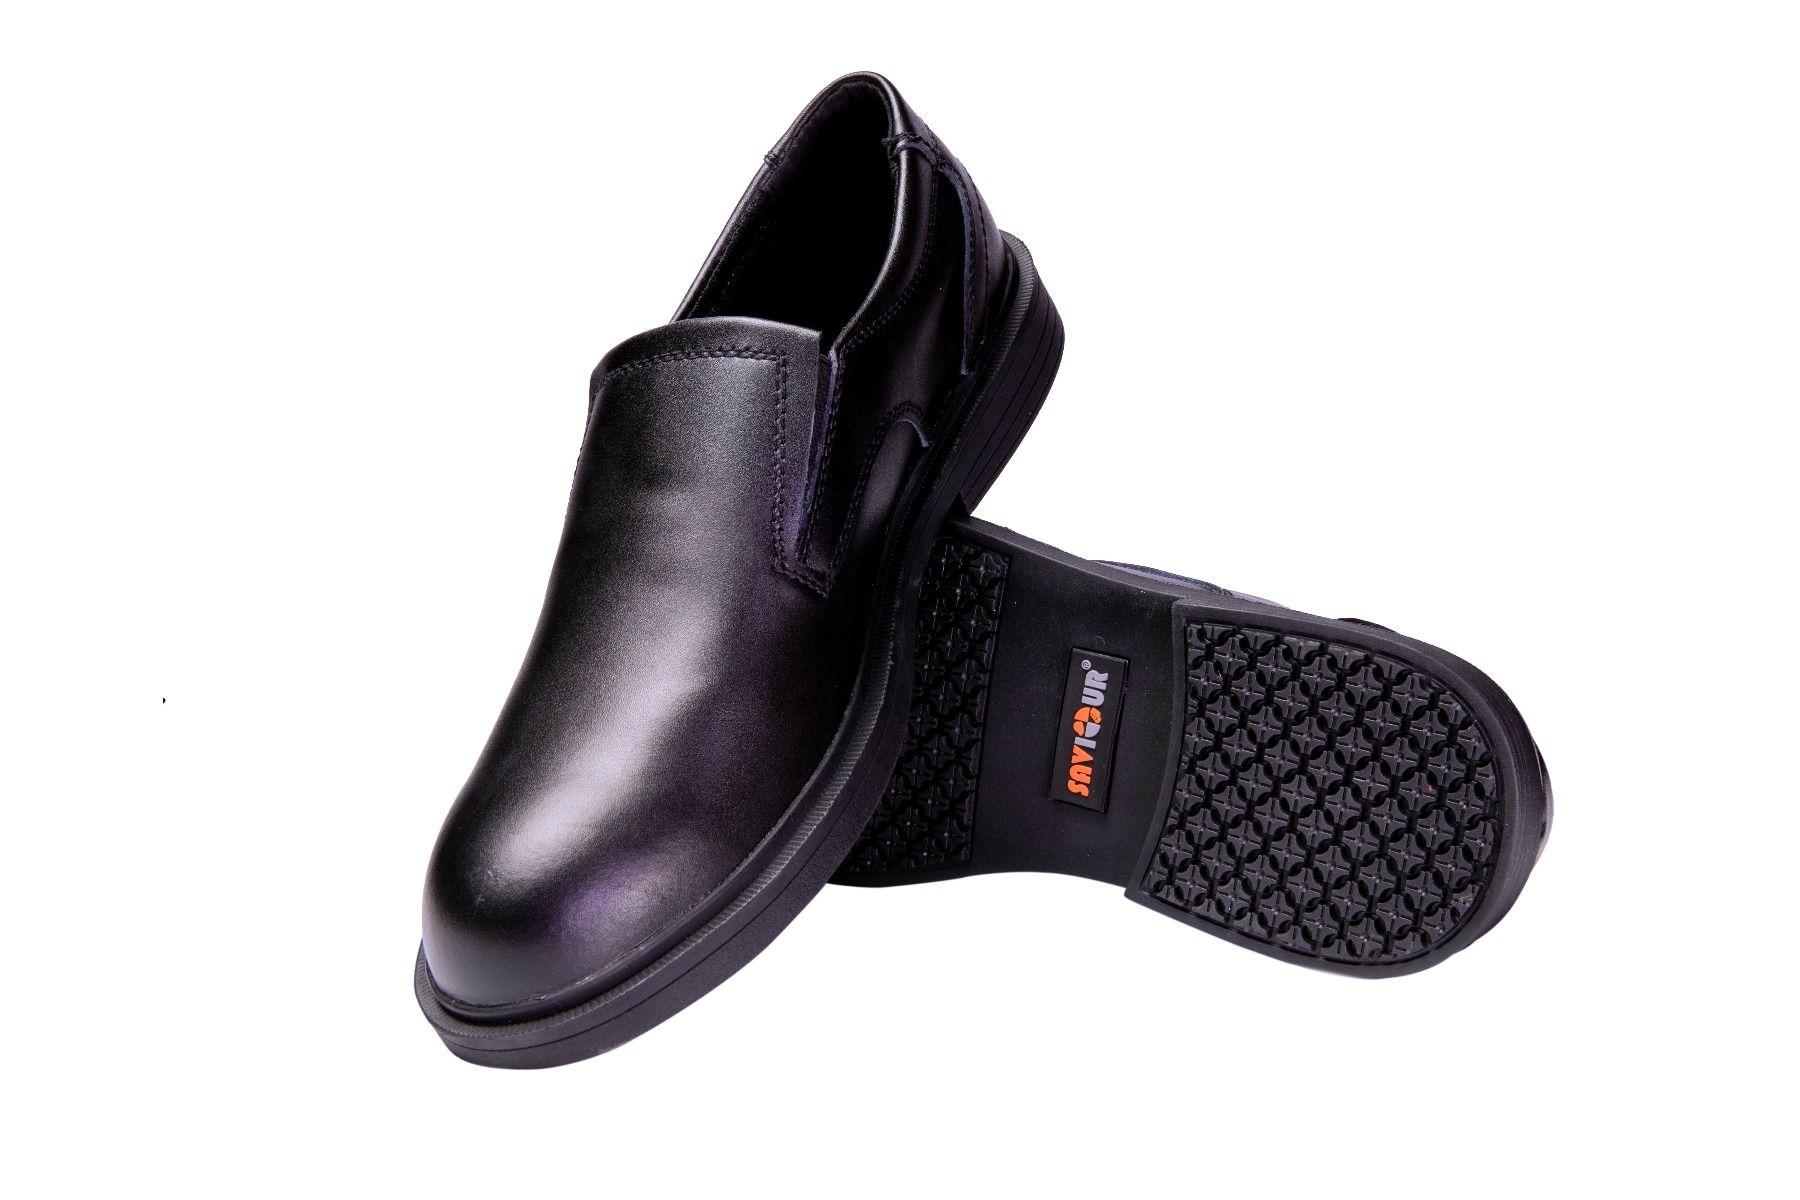 safety shoes that look like dress shoes